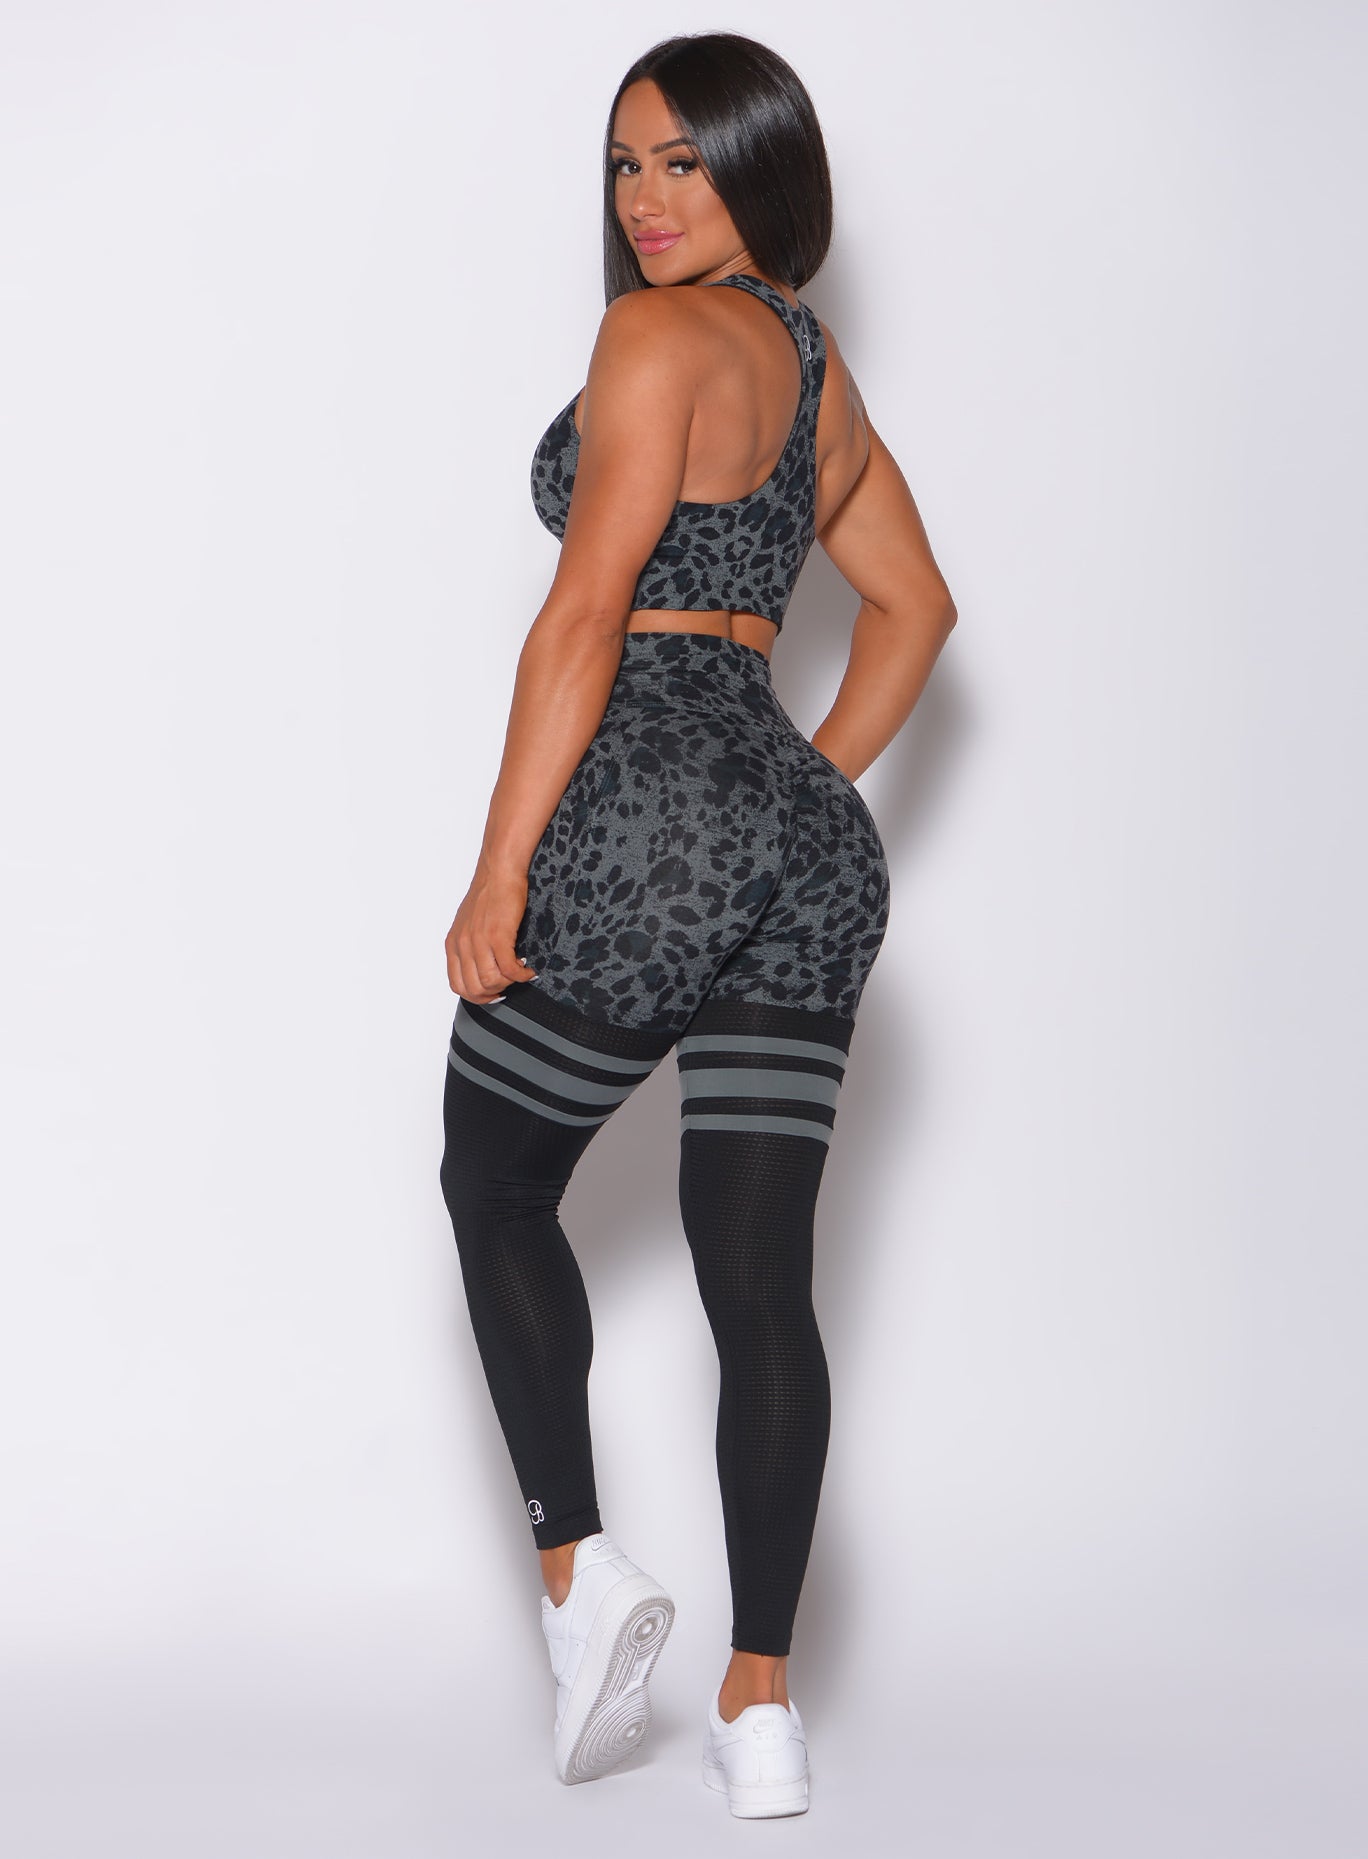 Left side profile view of a model in our scrunch thigh high in charcoal leopard print and a matching sports bra 